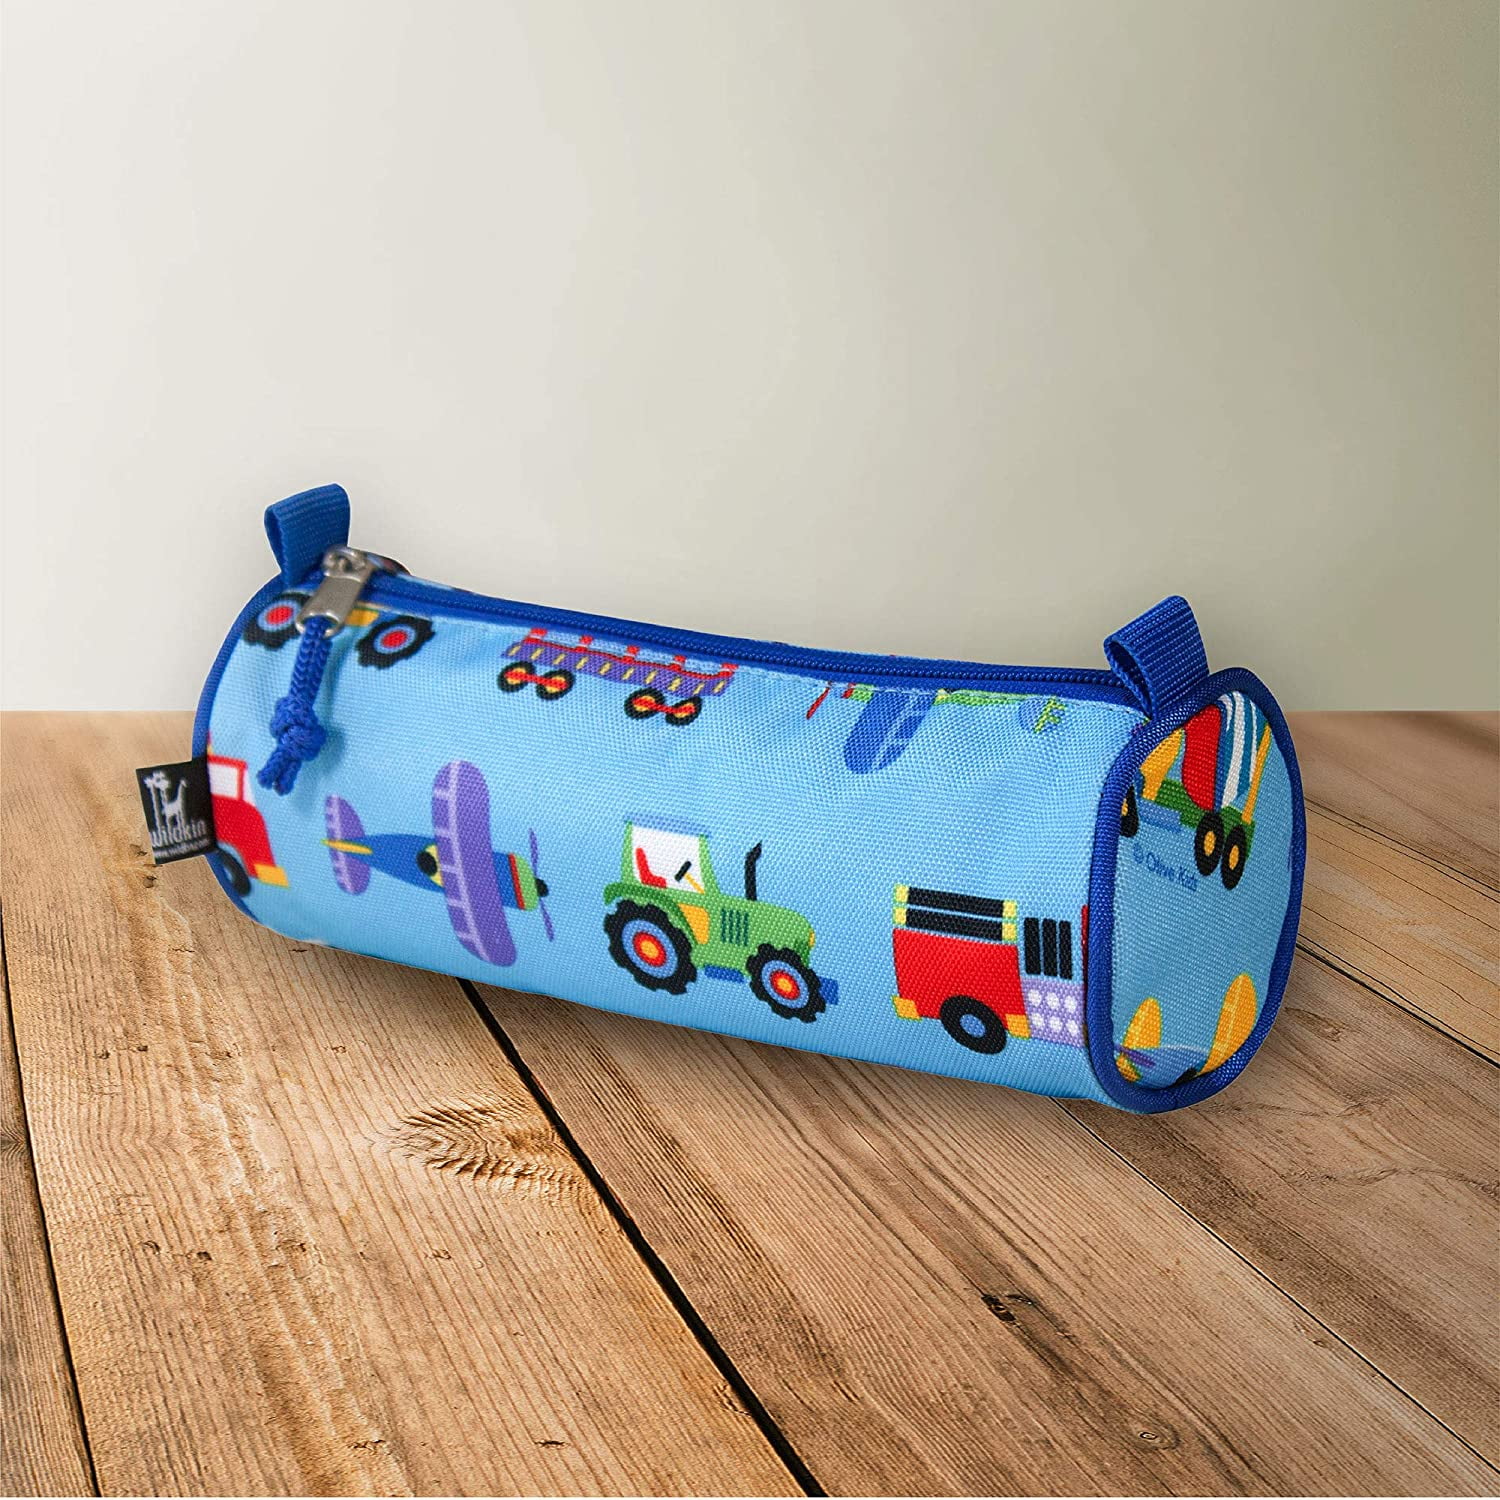 Perfect for Packing School Supplies and Travel,600-Denier Polyester Pencil Cases Measures 8x3x3 Inches Wildkin Kids Zippered Pencil Case for Boys and Girls Trains Planes & Trucks 